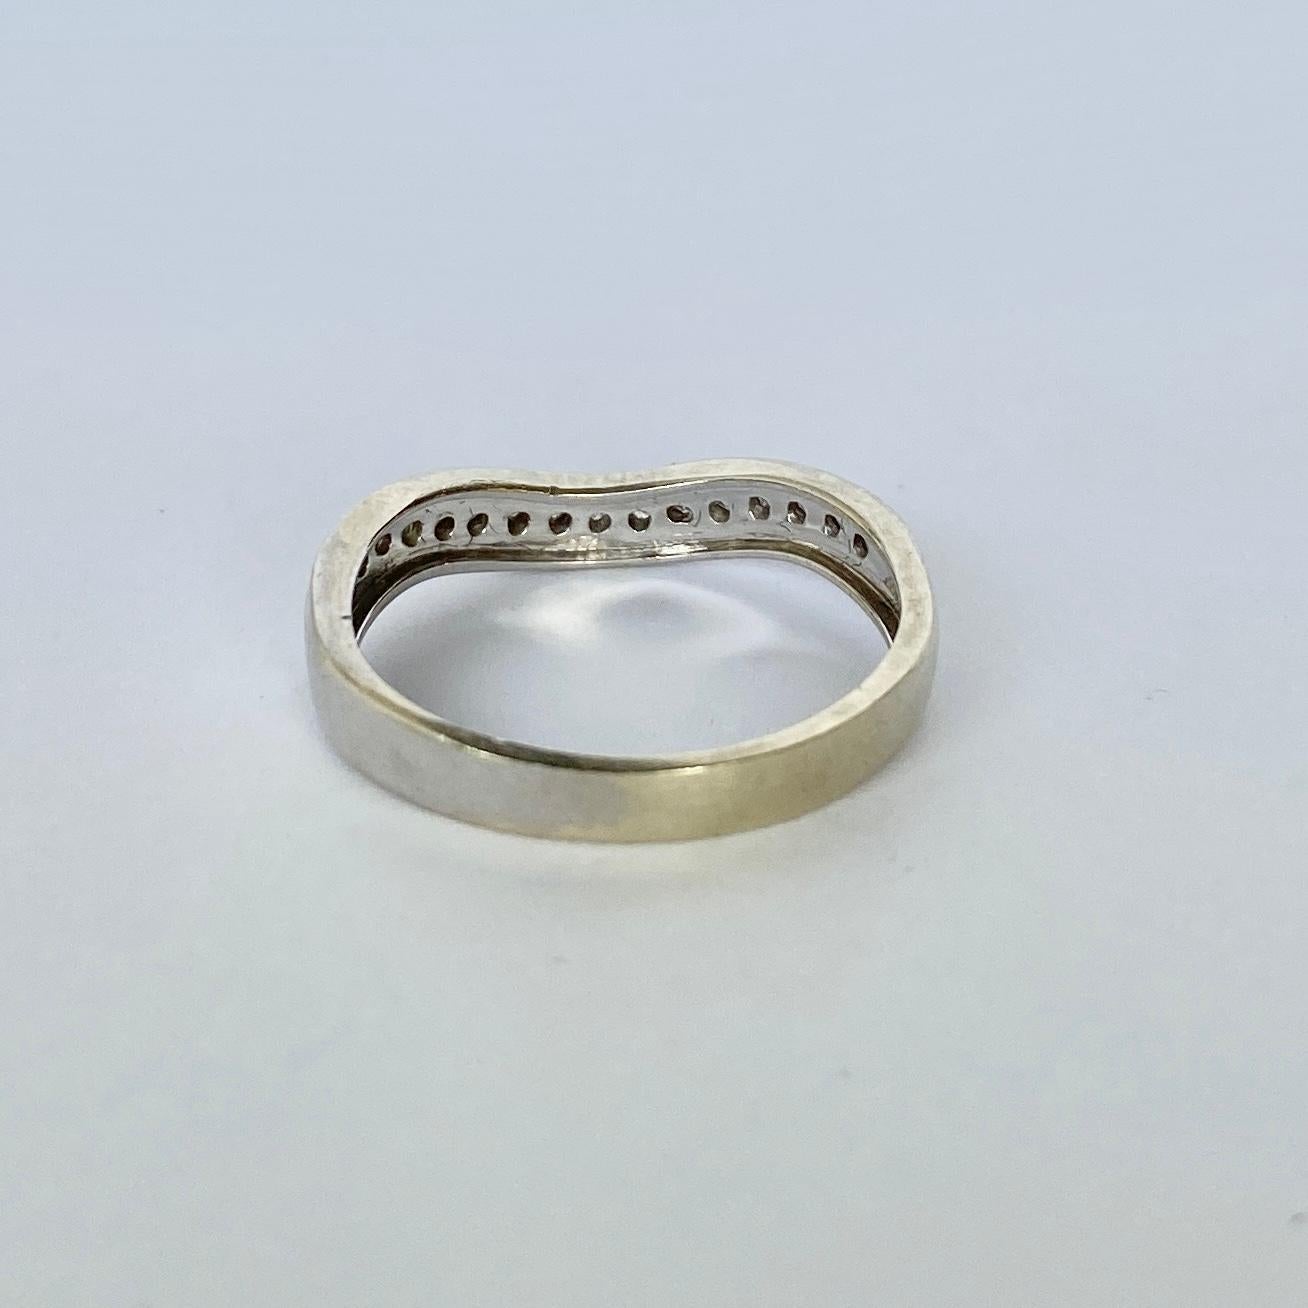 This half eternity band has a slight wave which is lovely worn alone or works well stacked with a solitaire ring. The diamonds in this band total approx 15pts and are bright and sparkly. 

Ring Size: L or 5 3/4 
Band Width: 3mm 

Weight: 1.8g 